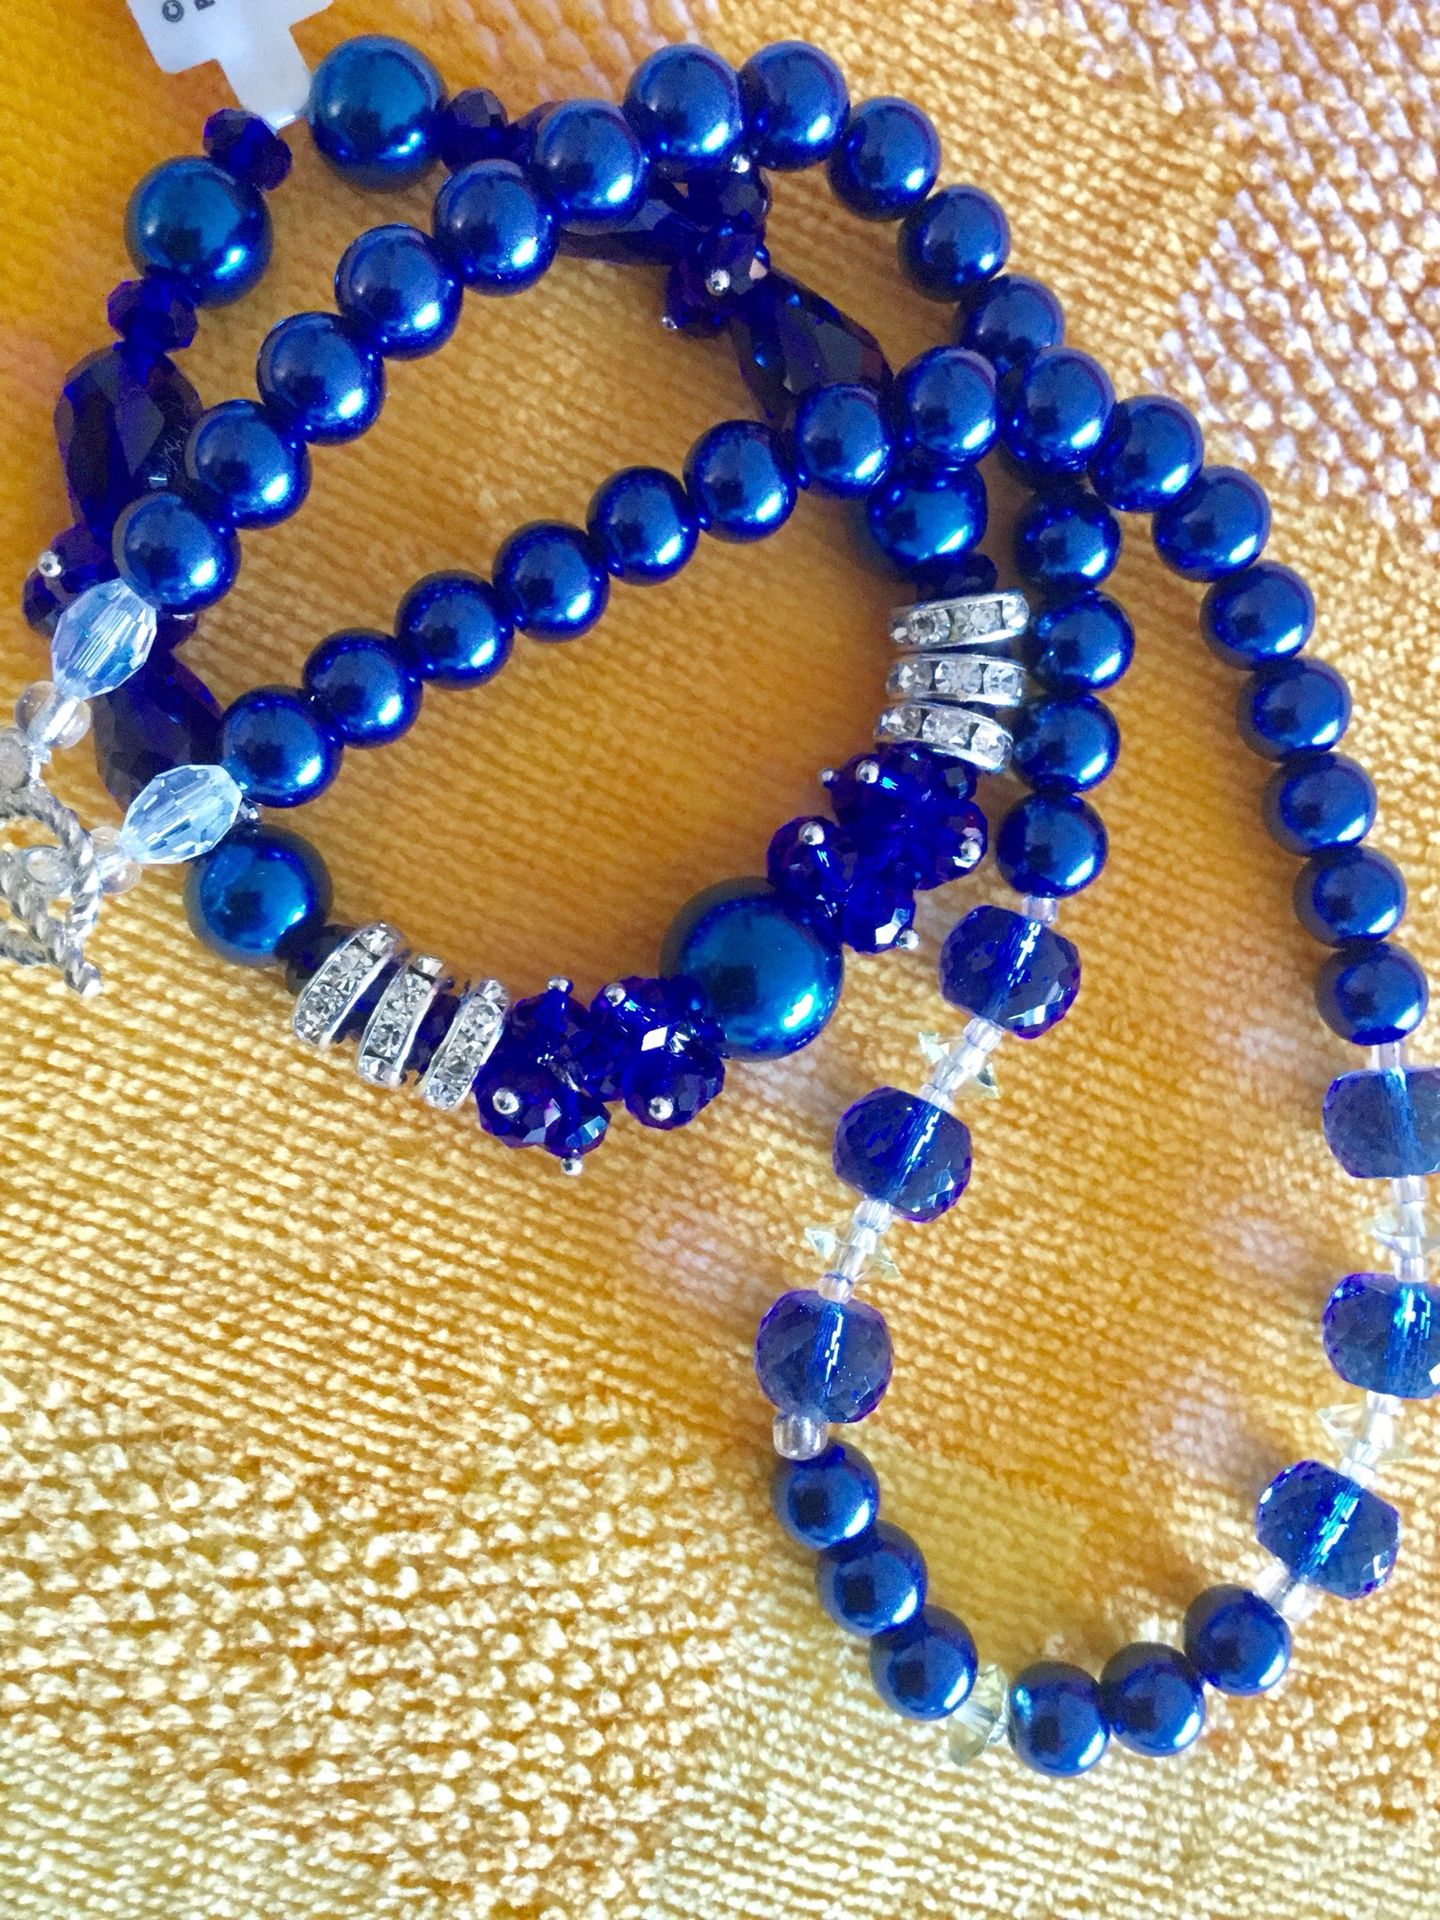 Love jewelry 💙 Fashion necklace with bracelet together 🦋💙🦋 Blue glass beads with Crystals / Visit for more gifts & jewelry & collectables 🦋